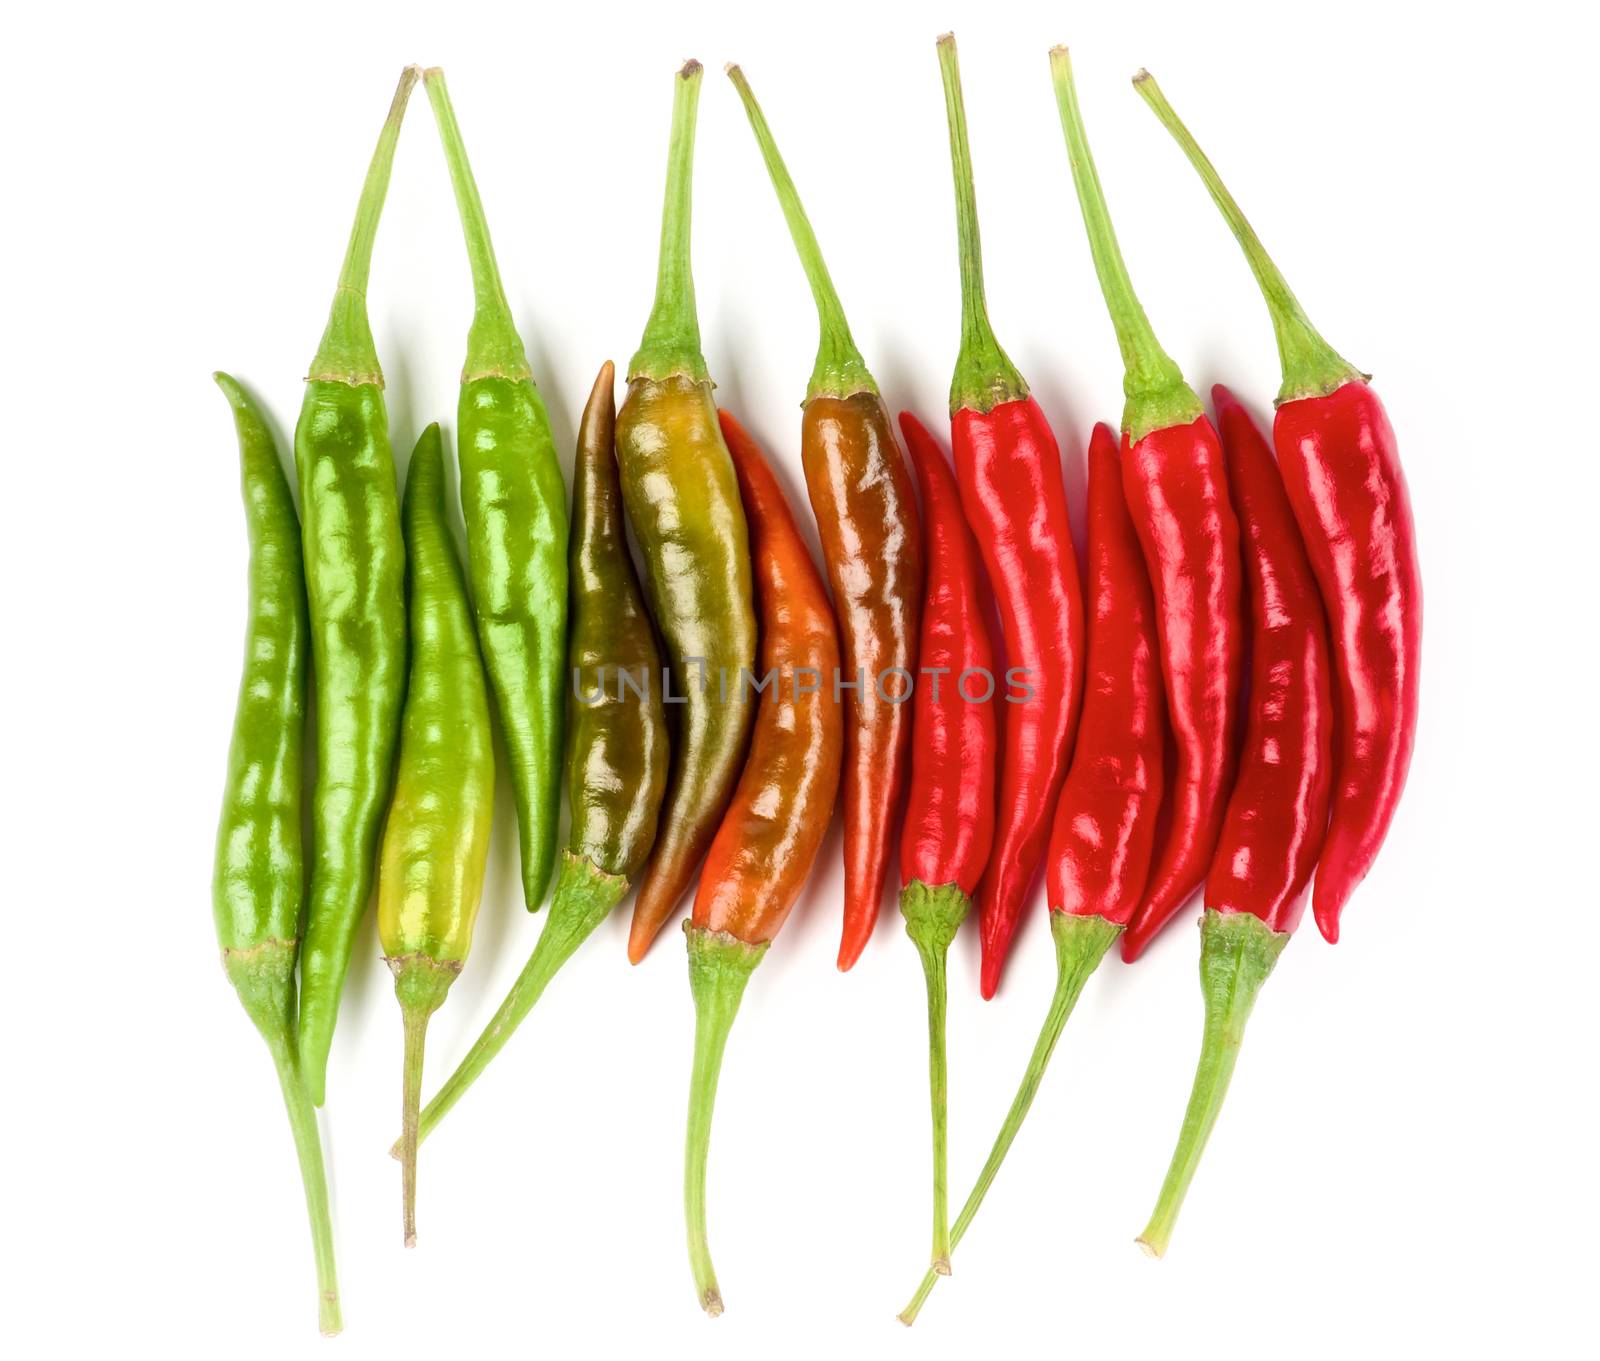 Arrangement of Perfect Shiny Red, Orange and Green Hot Chili Peppers In a Row isolated on White background